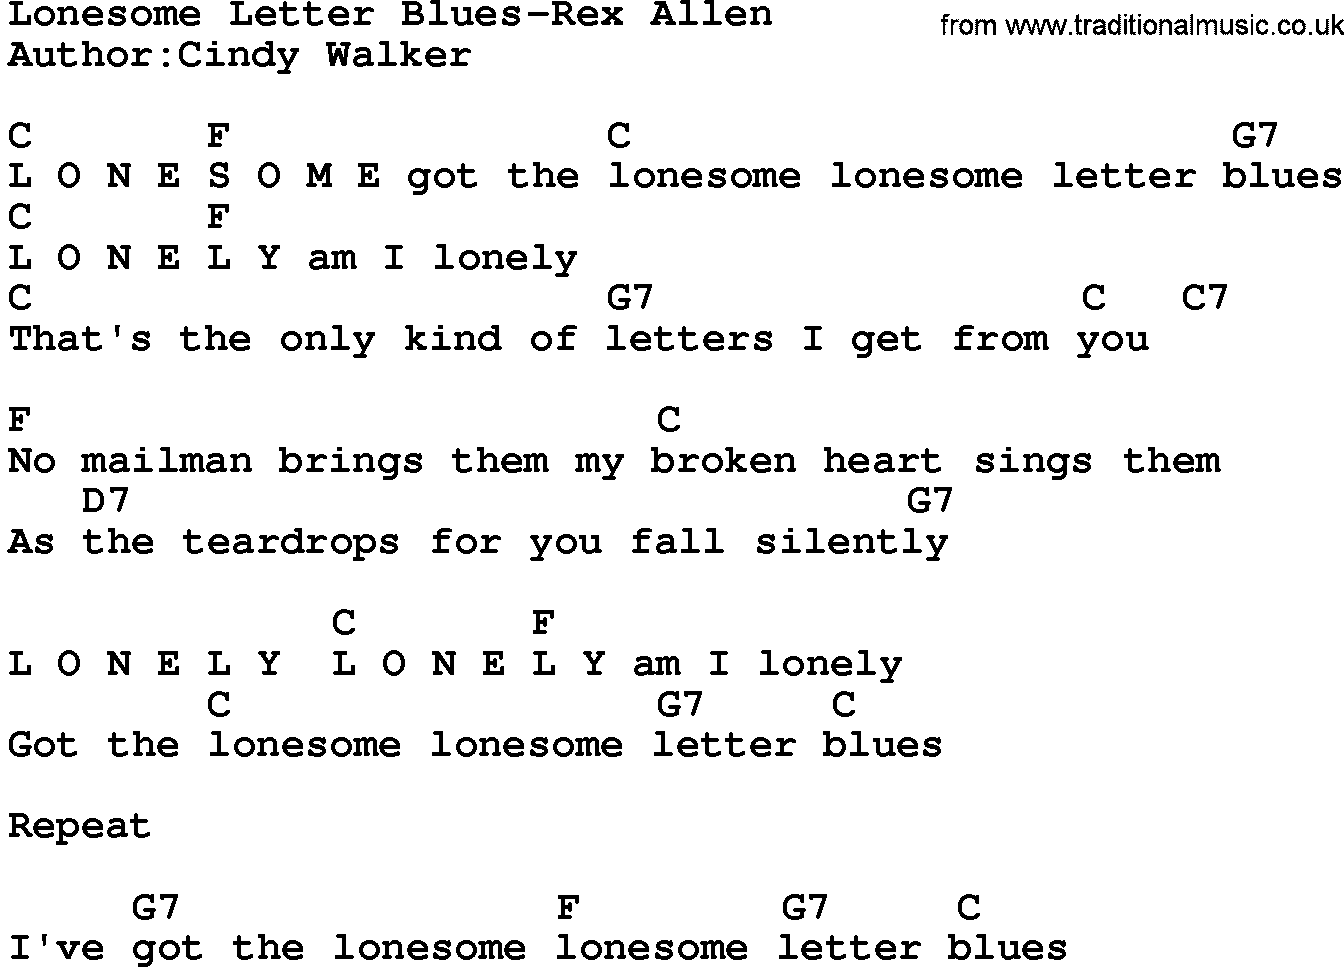 Country music song: Lonesome Letter Blues-Rex Allen lyrics and chords